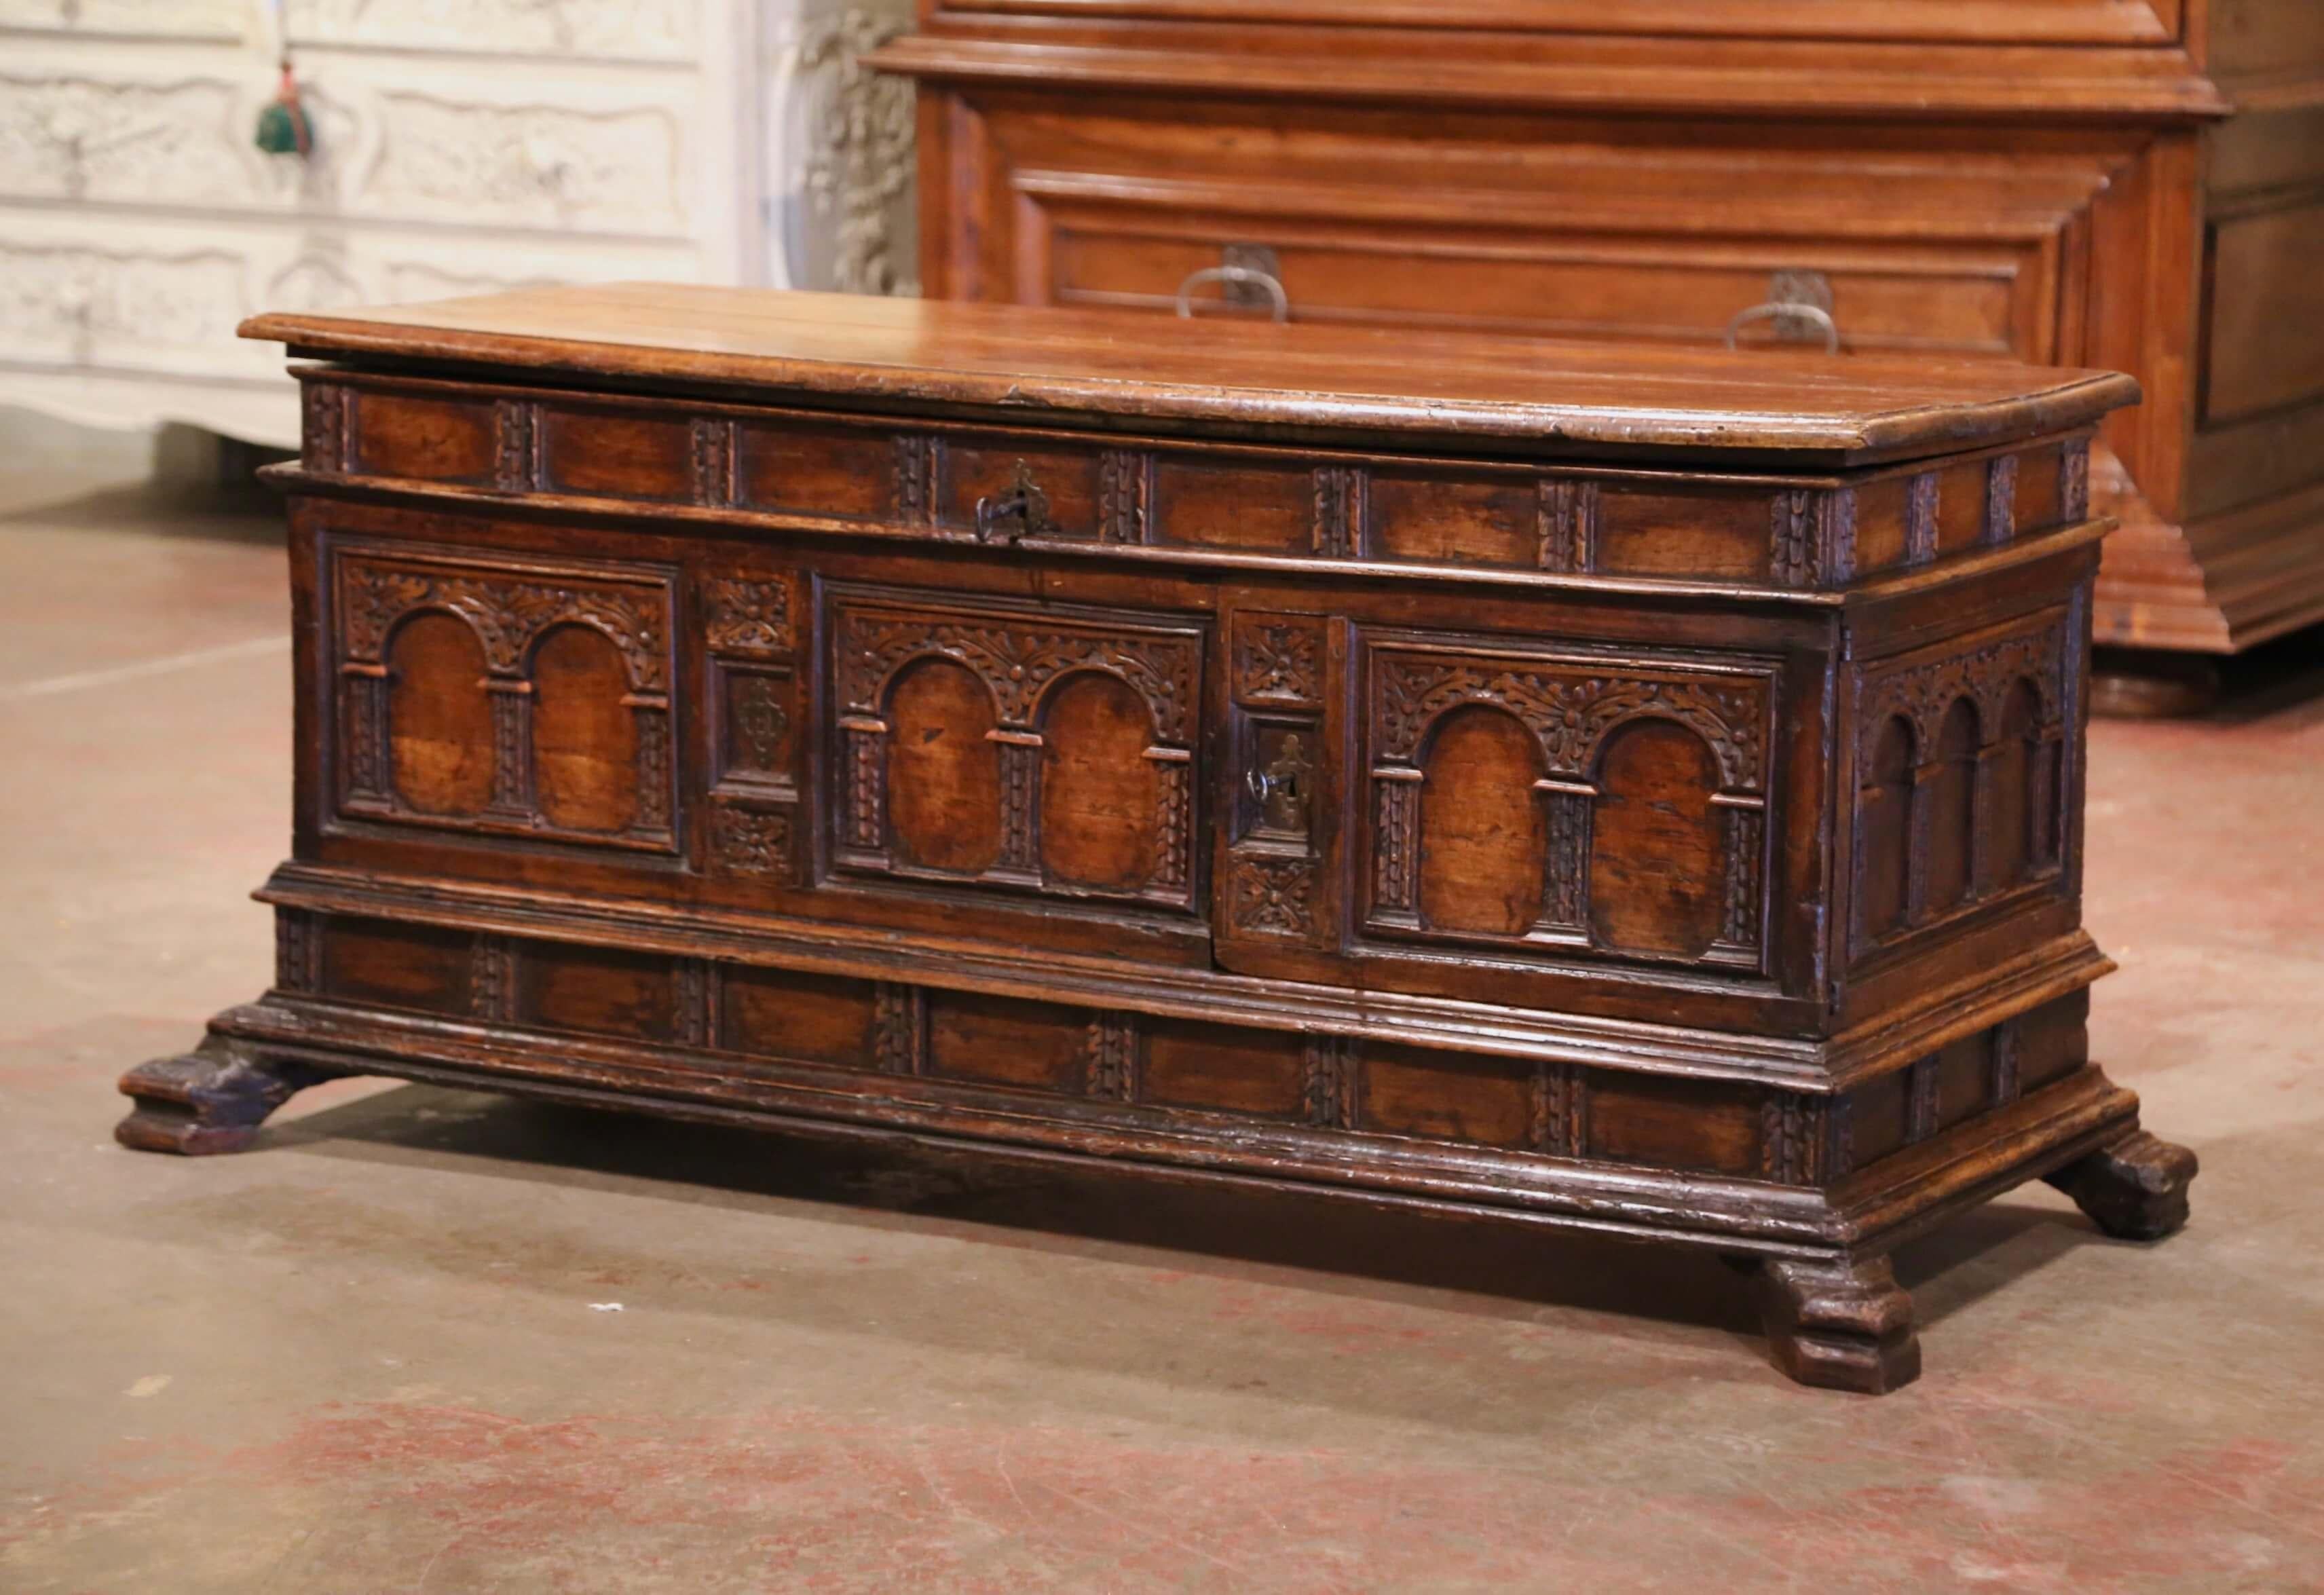 Place this elegant antique coffer at the foot of a king size bed. Crafted in Italy, circa 1680, the rectangular trunk stands on bracket feet. Heavily carved on all three sides with arch and foliage decor, the cabinet features carved panels on the